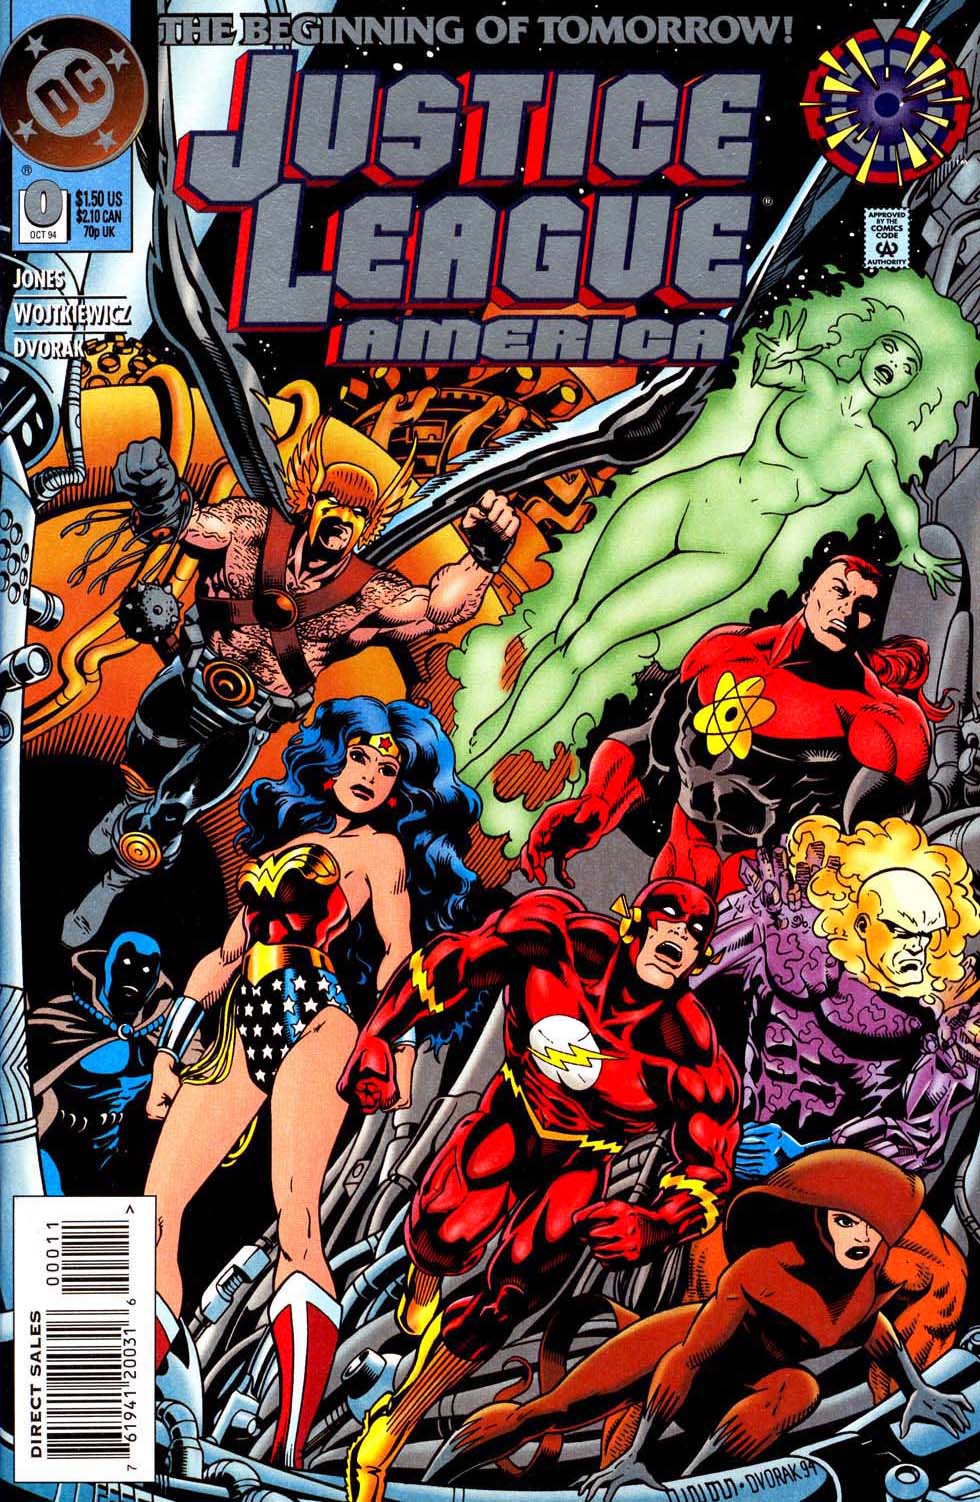 Read online Justice League America comic -  Issue #0 - 1